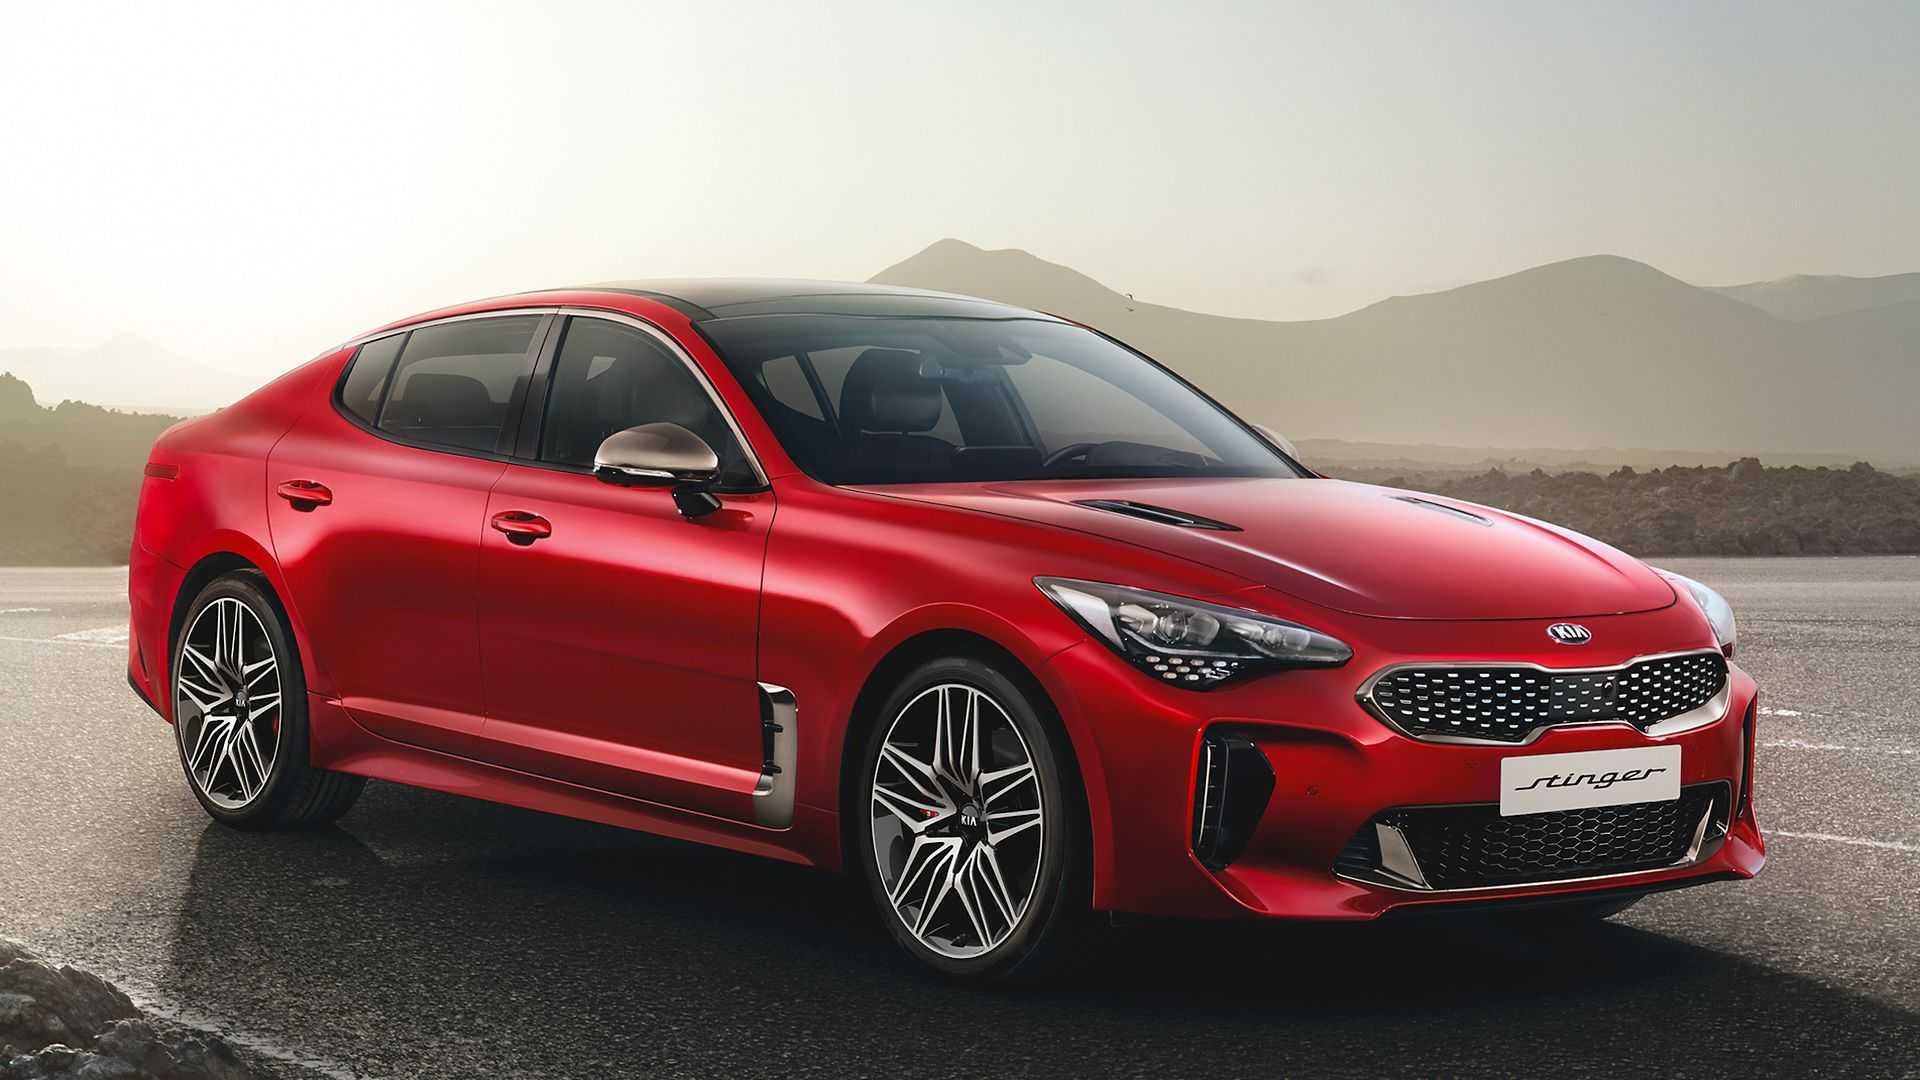 2022 Kia Stinger Coming To The US With 300 Horsepower For Base Model